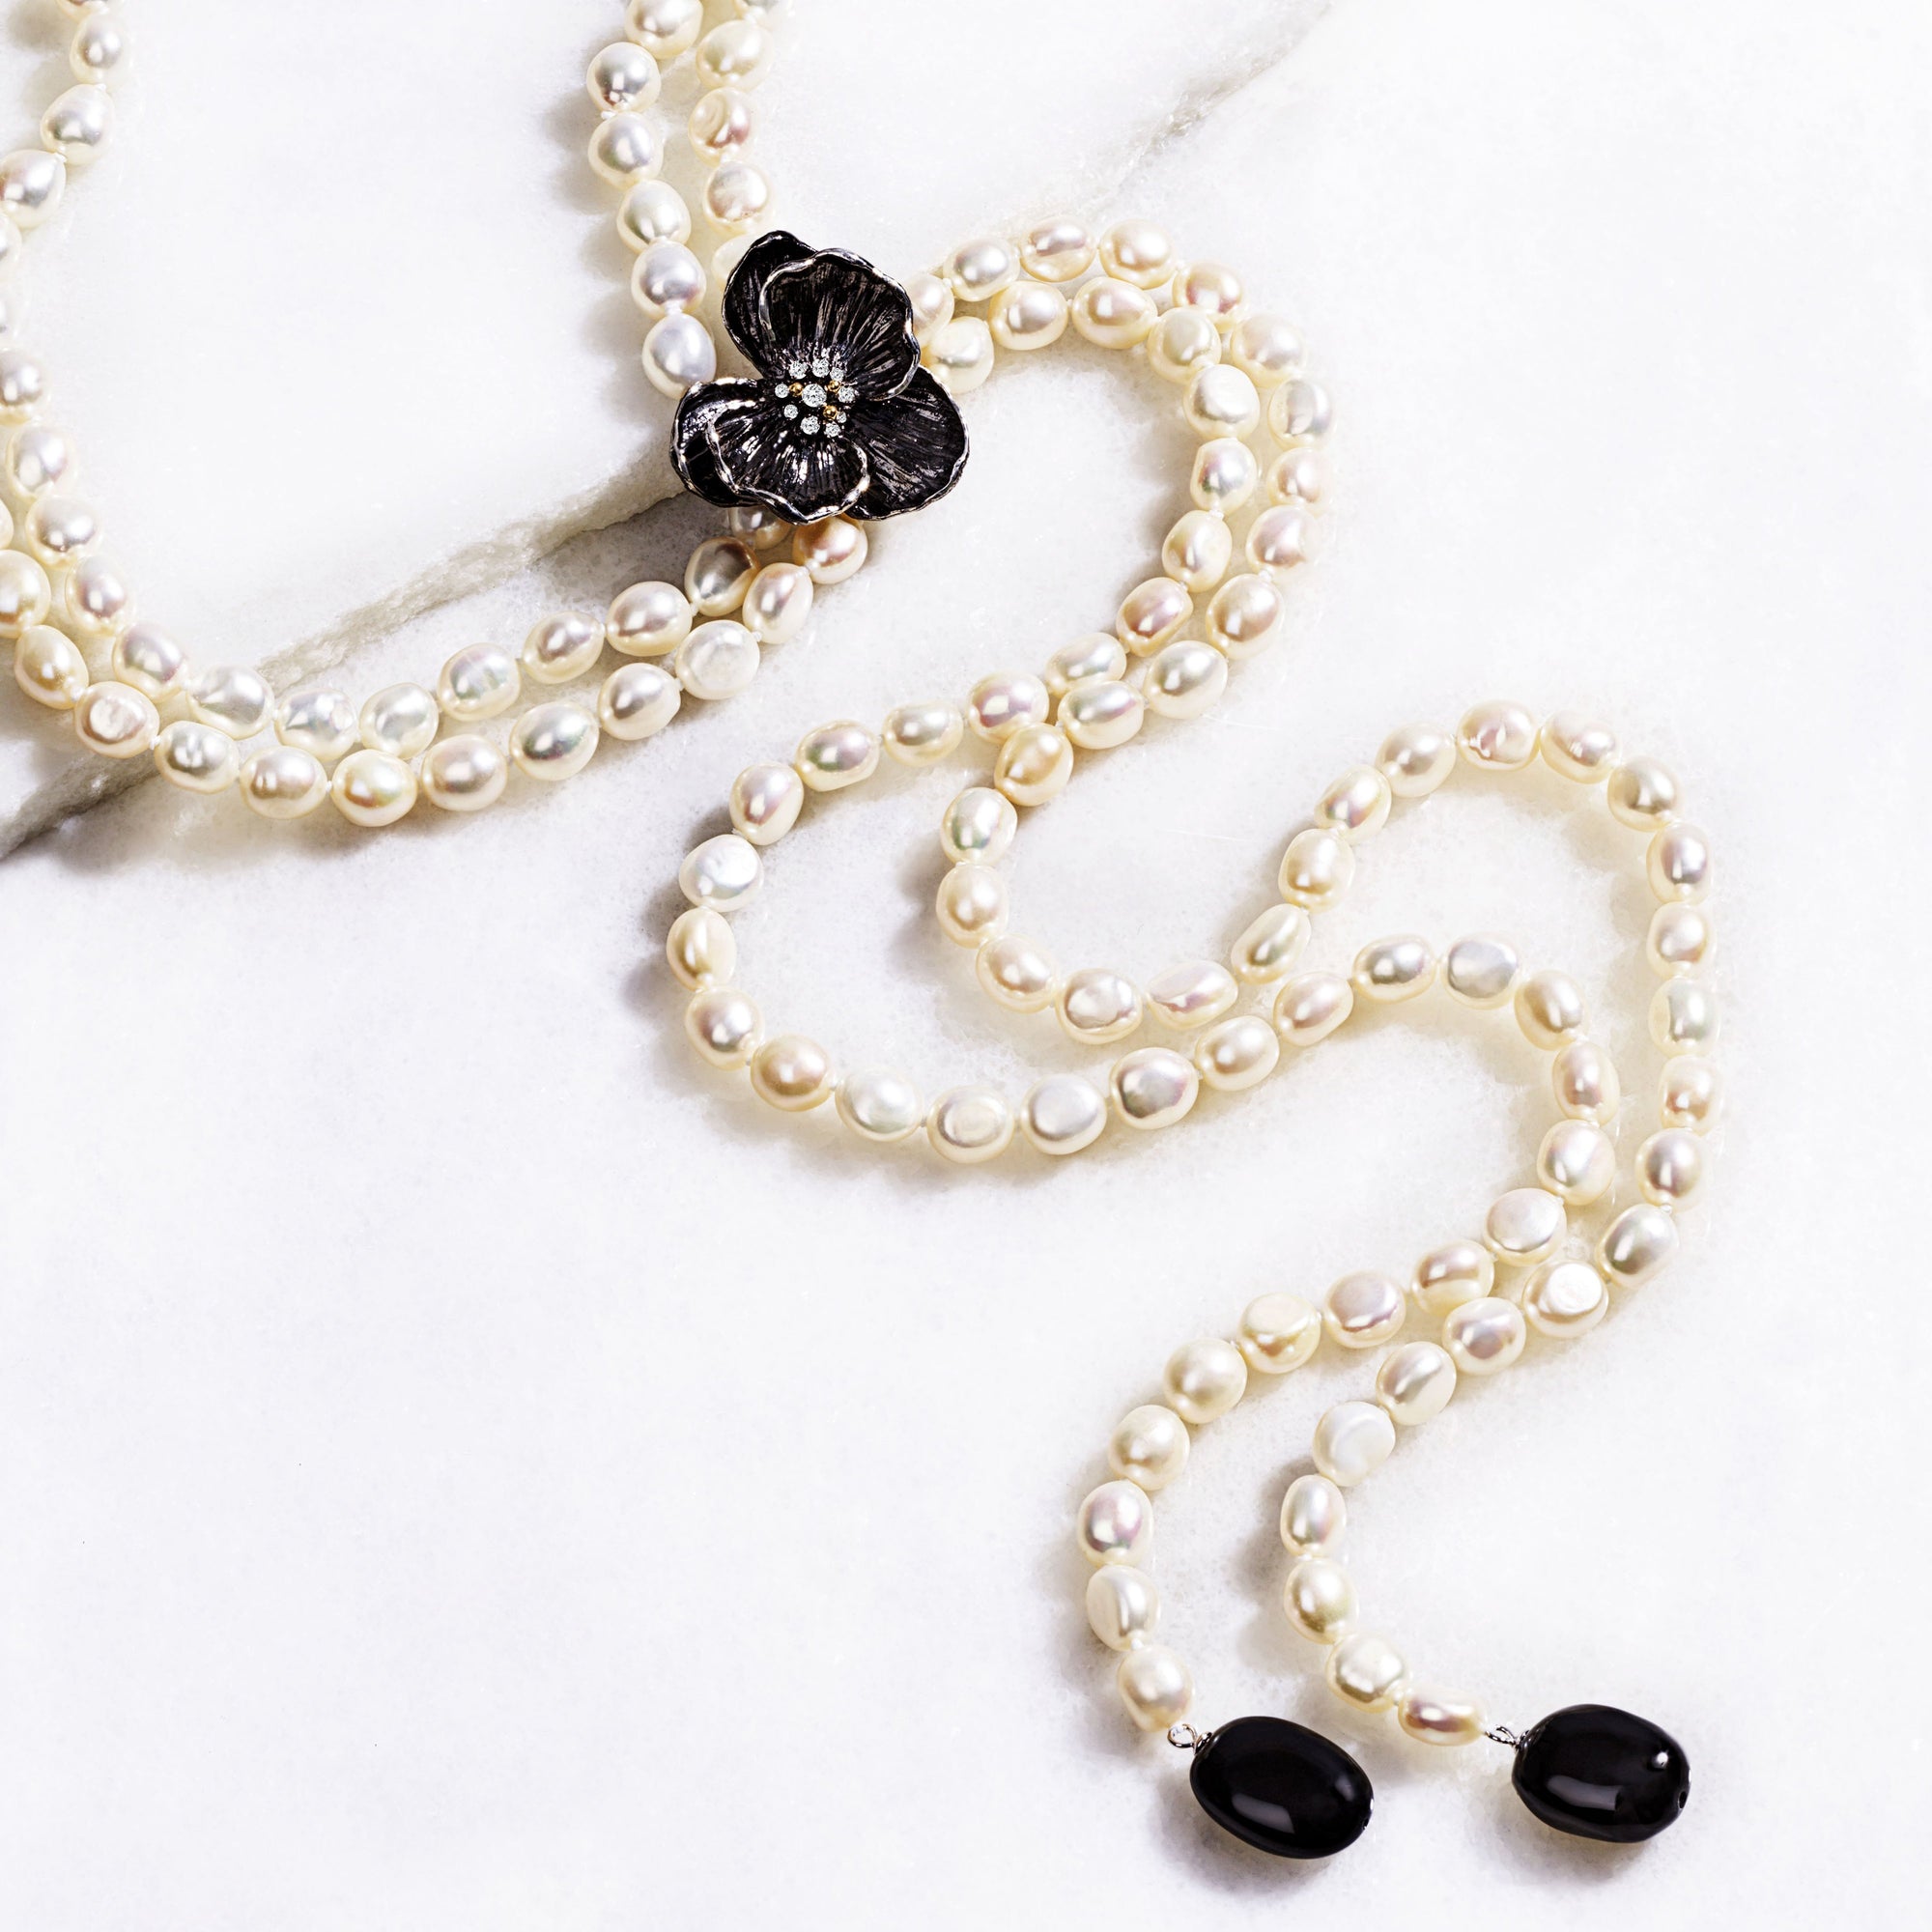 Michael Aram Orchid Lariat Necklace with Pearls, Black Onyx and Diamonds